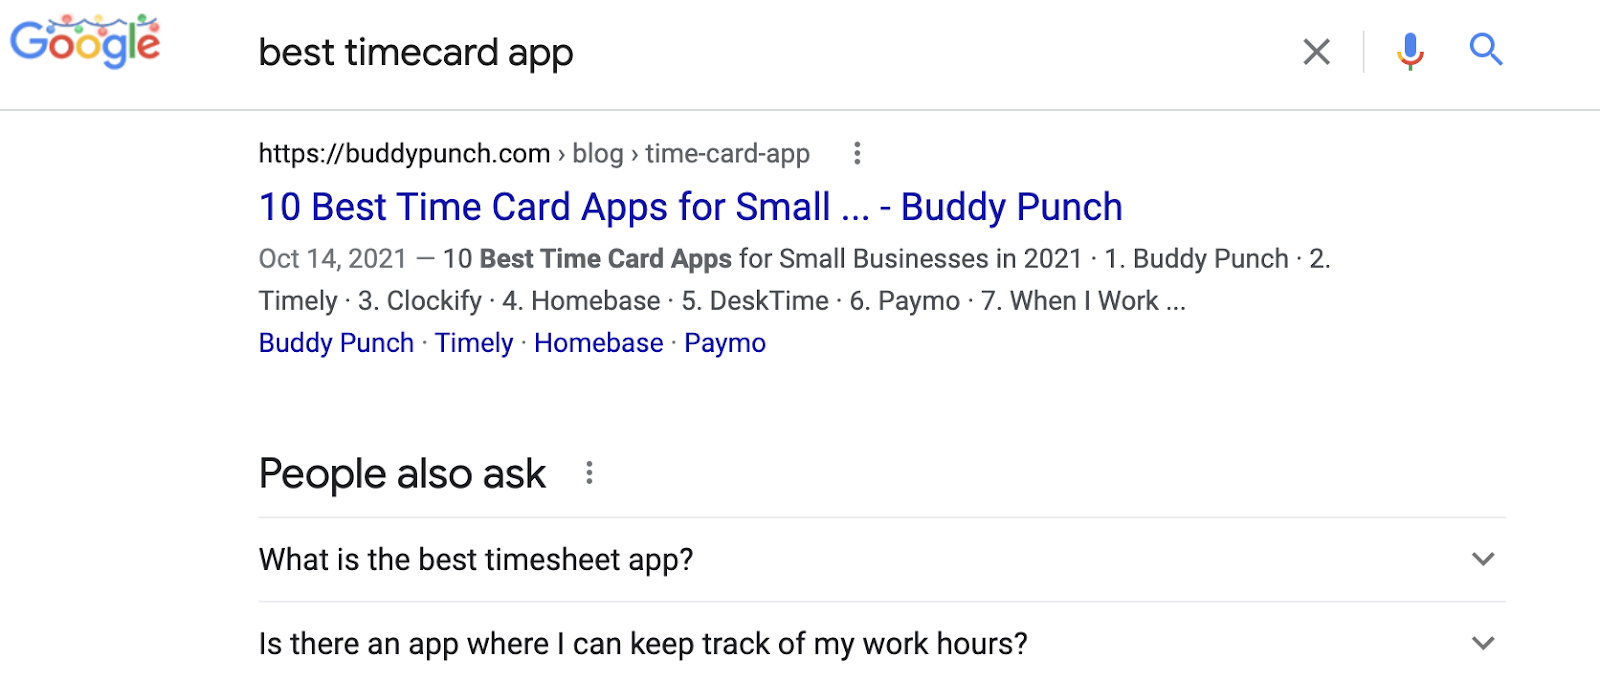 Google search result position #1 for "best timecard app".